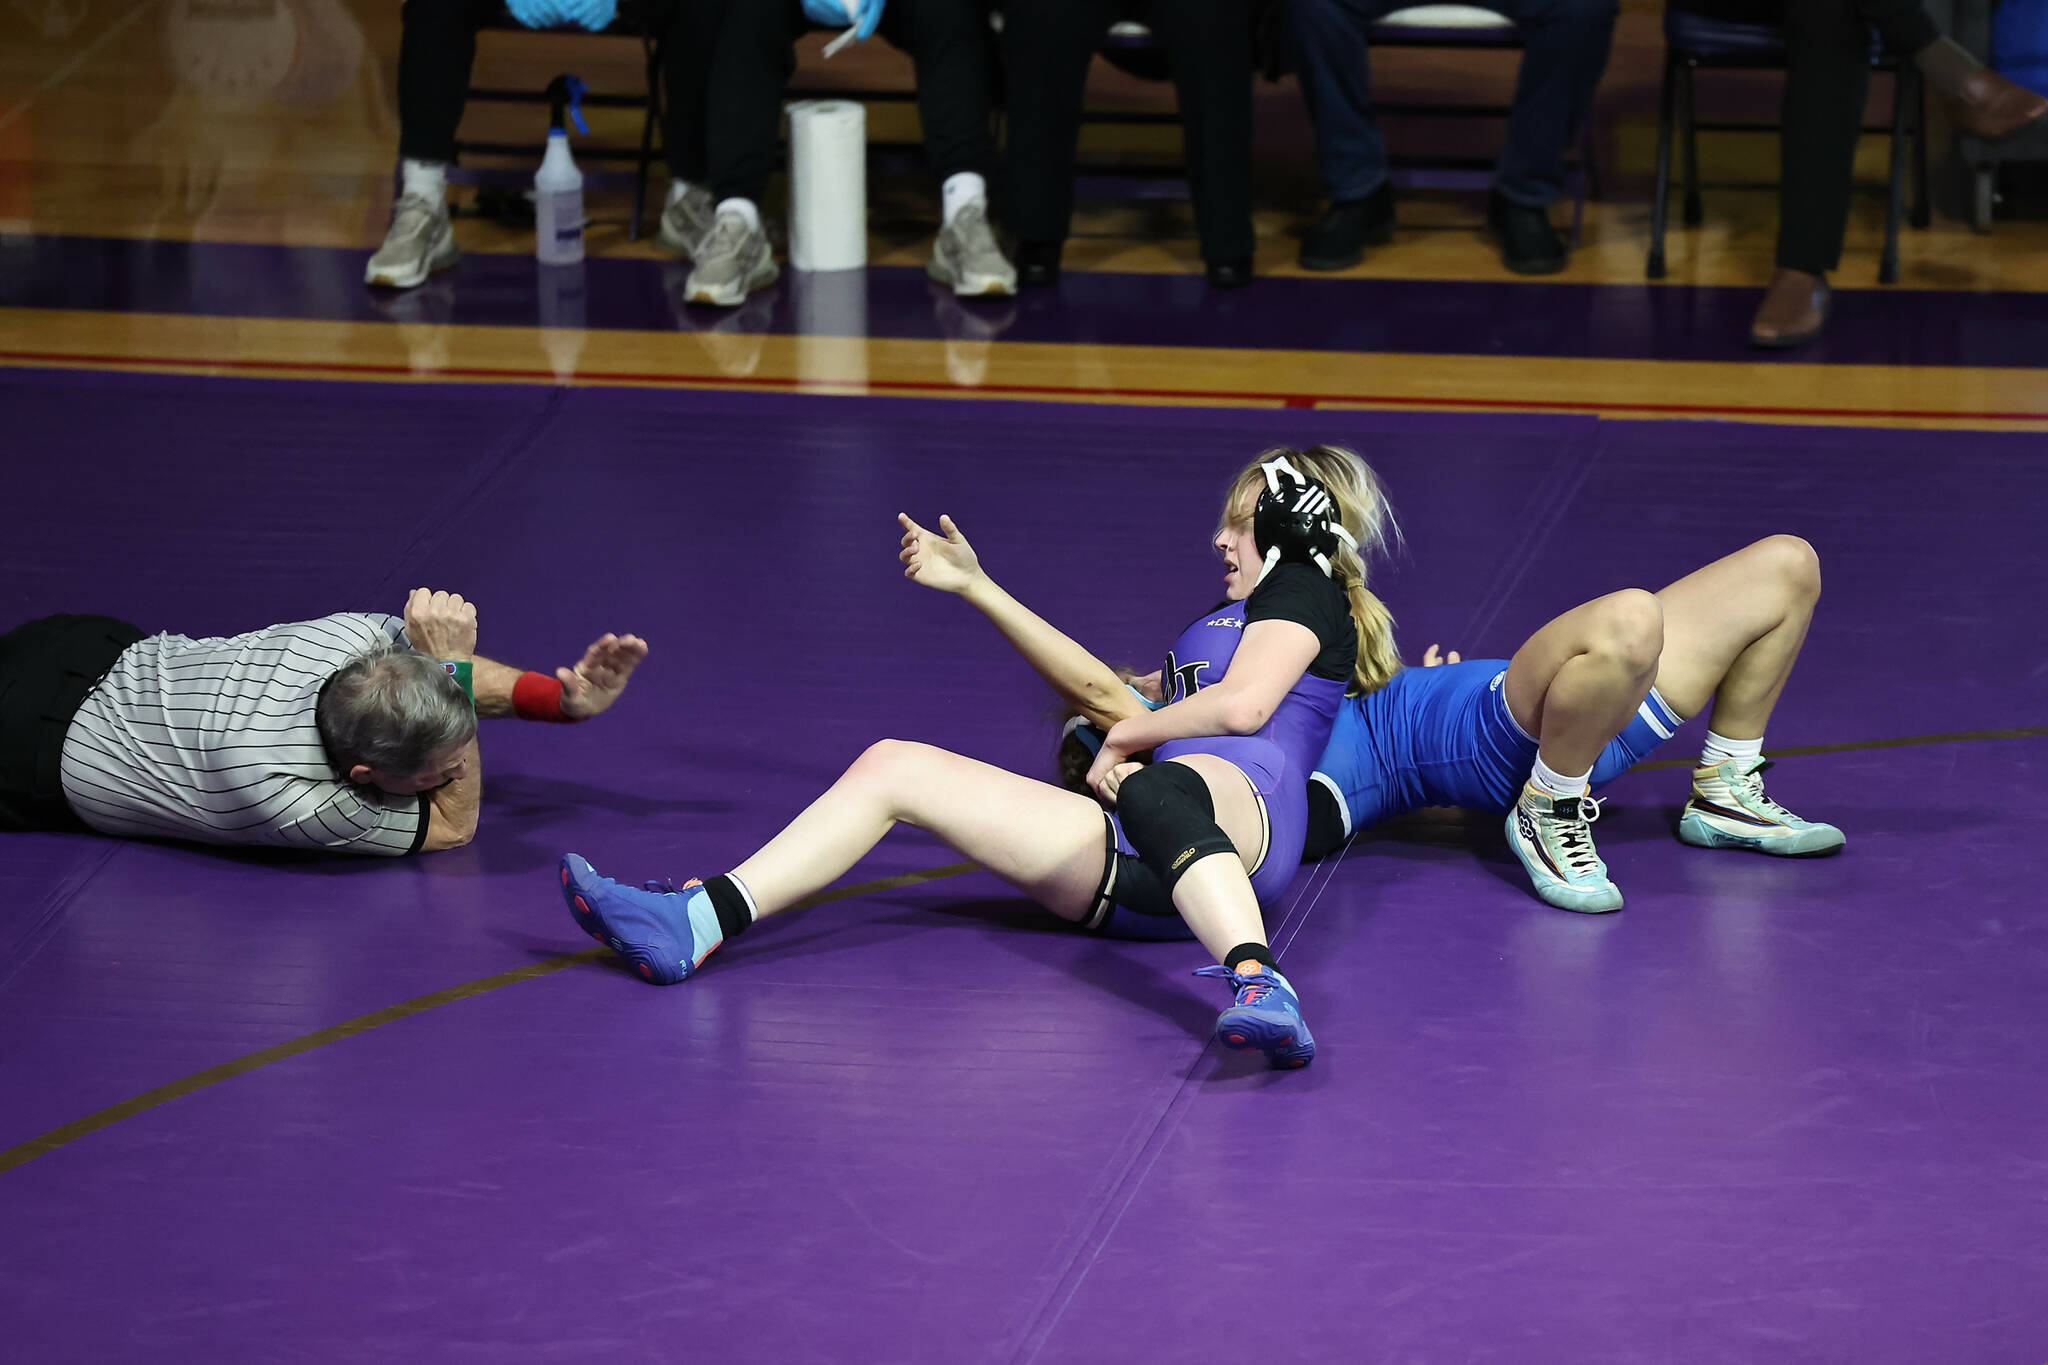 Oak Harbor senior Danielle Kanterman tries to pin her opponent during the Northwest Conference dual meet held Jan. 25 at Oak Harbor High School. She eventually won her match and the Wildcats captured the conference championship. (Photo by John Fisken)